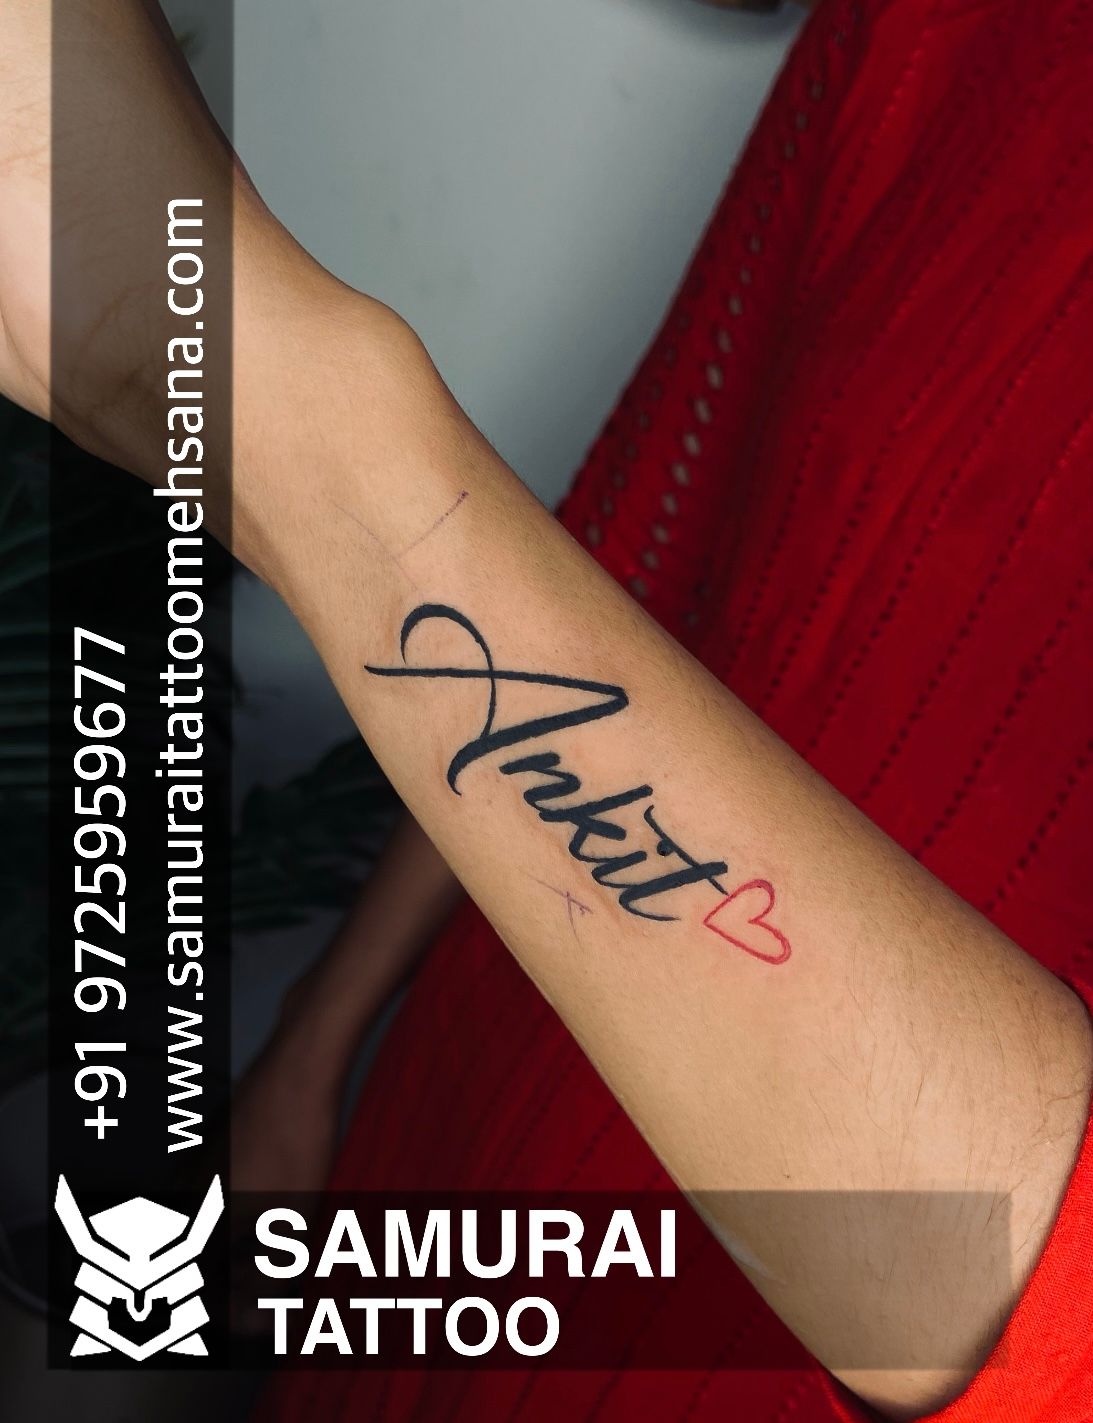 Discover 77 about ankit name style tattoo super cool  indaotaonec